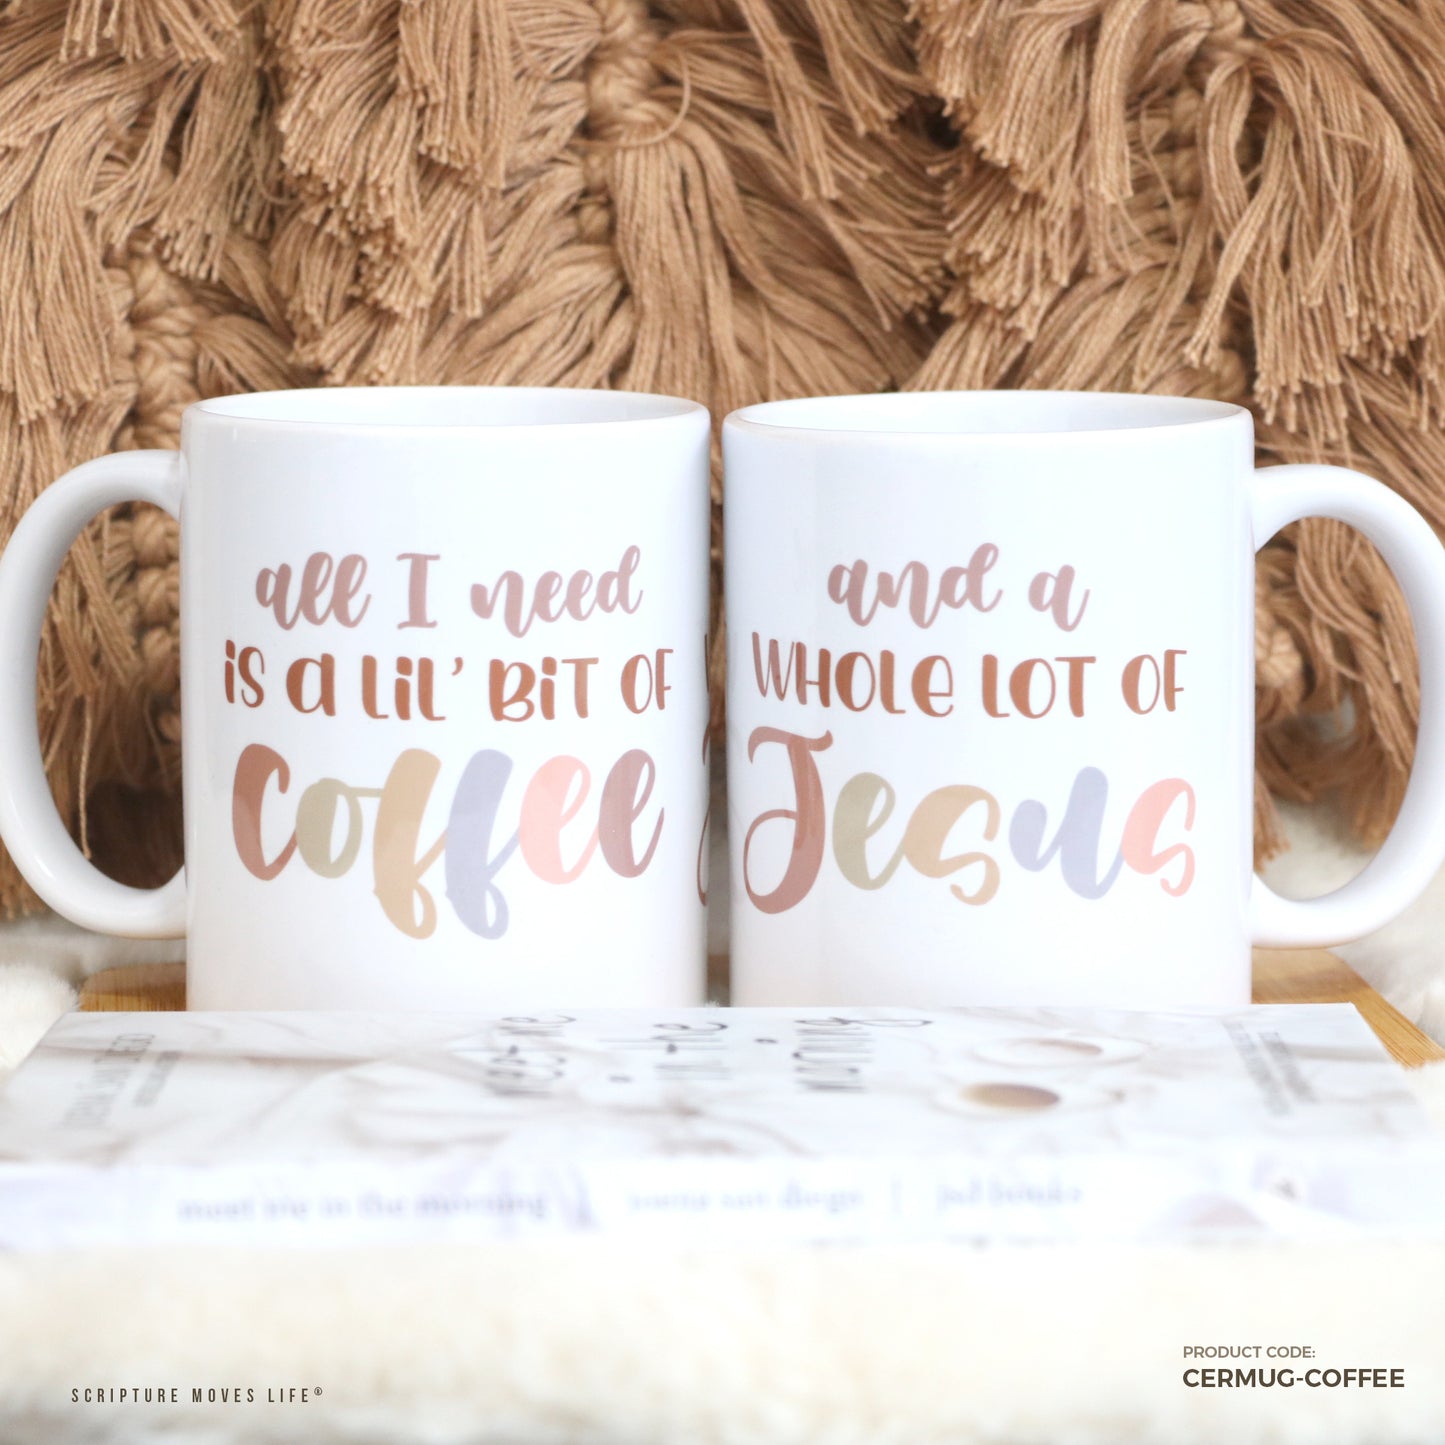 Ceramic Mug-All I need is a little bit of Coffee and a whole lot of Jesus